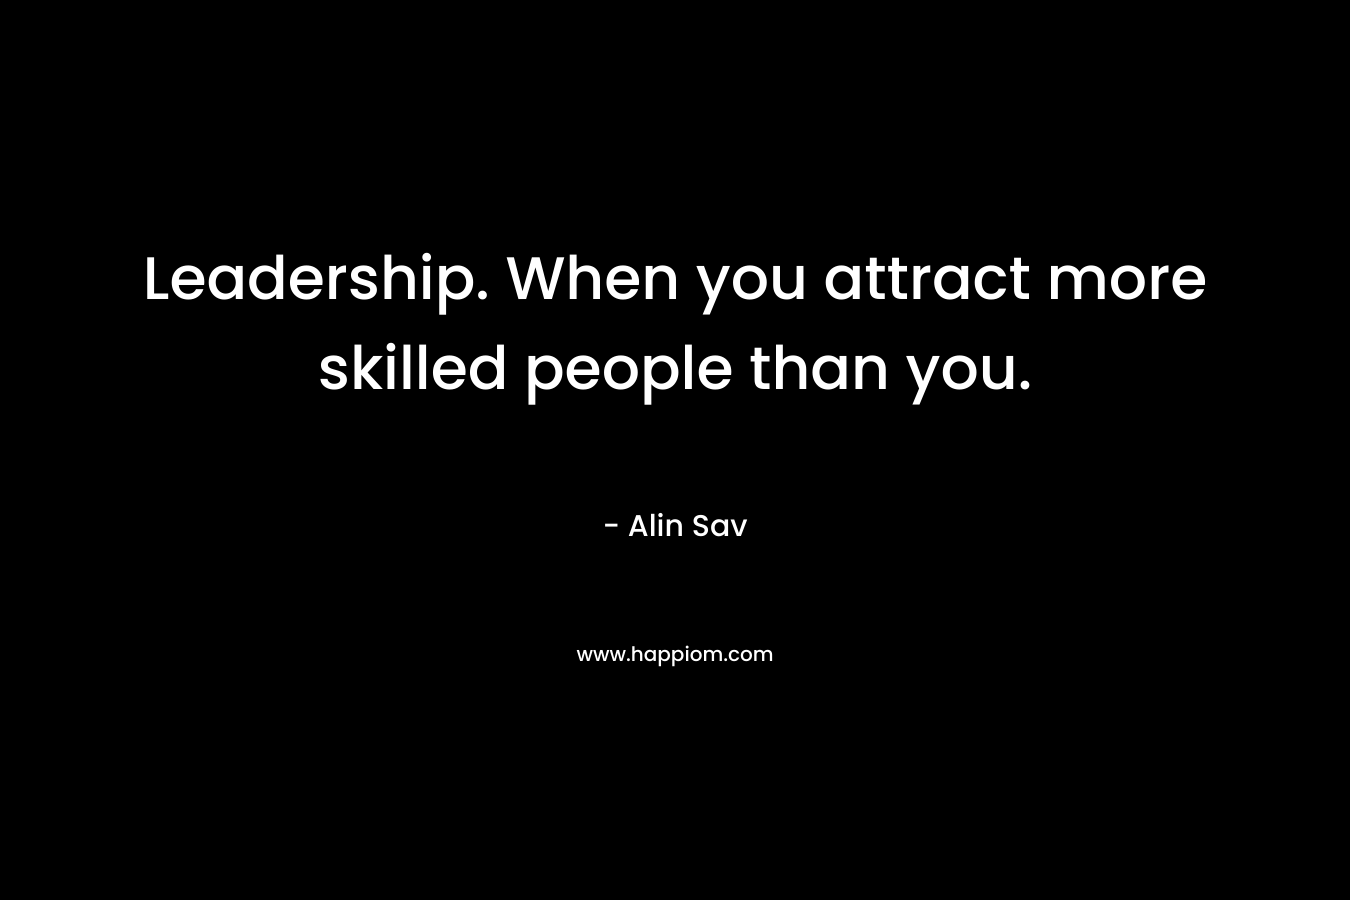 Leadership. When you attract more skilled people than you.